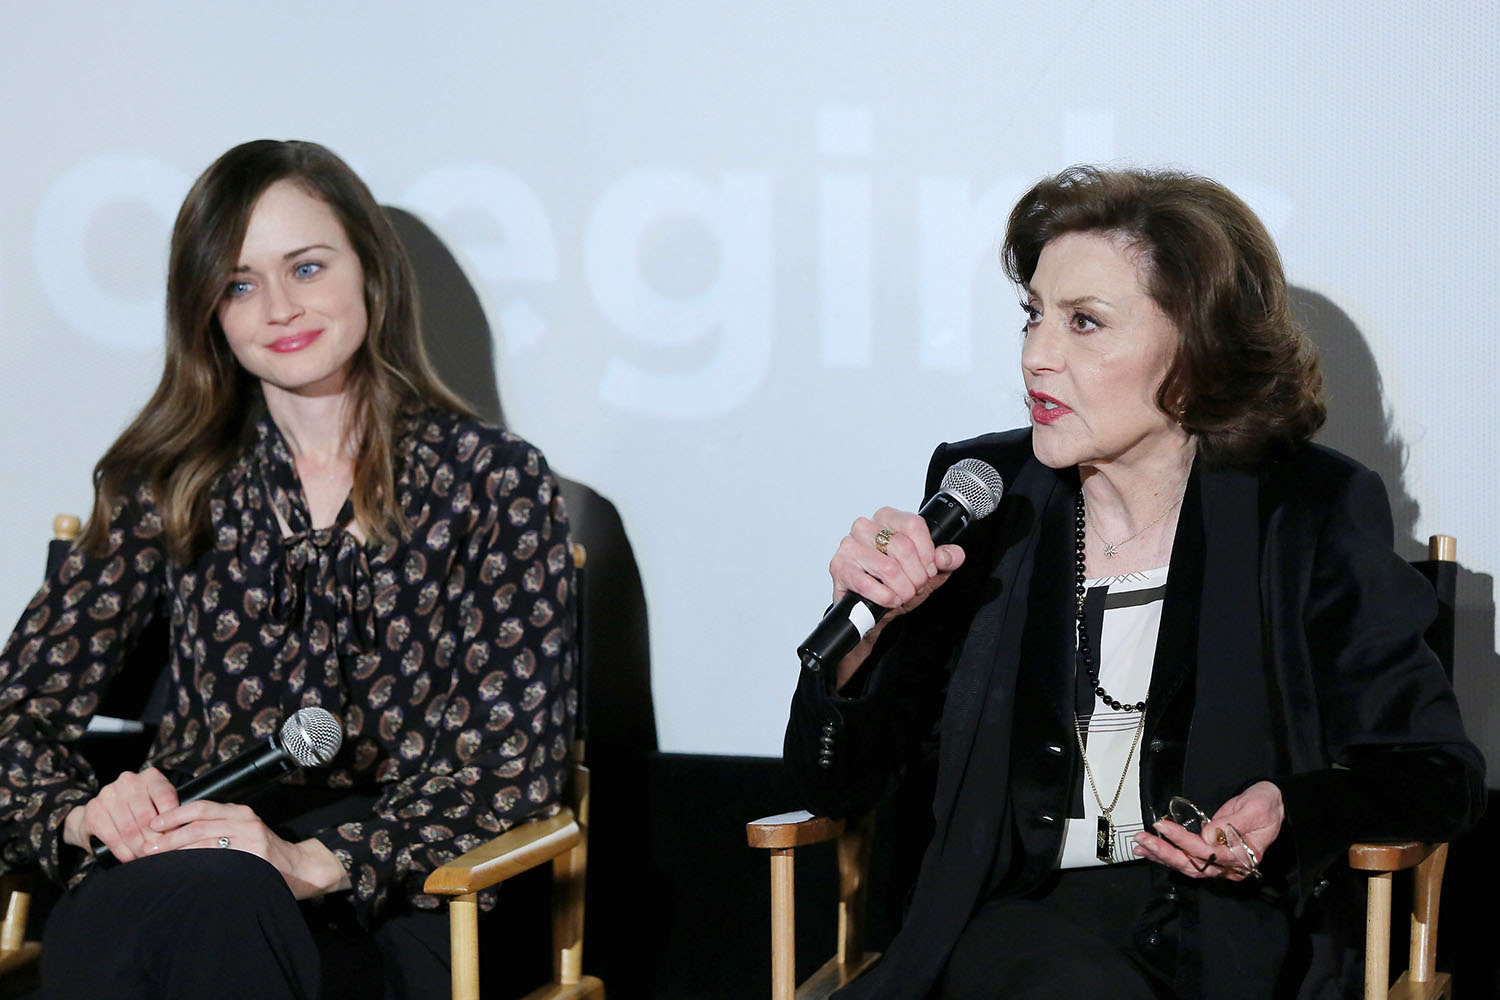 Gilmore Girls stars Alexis Bledel and Kelly Bishop each hold a mic at the Gilmore Girls: A Year in the Life event